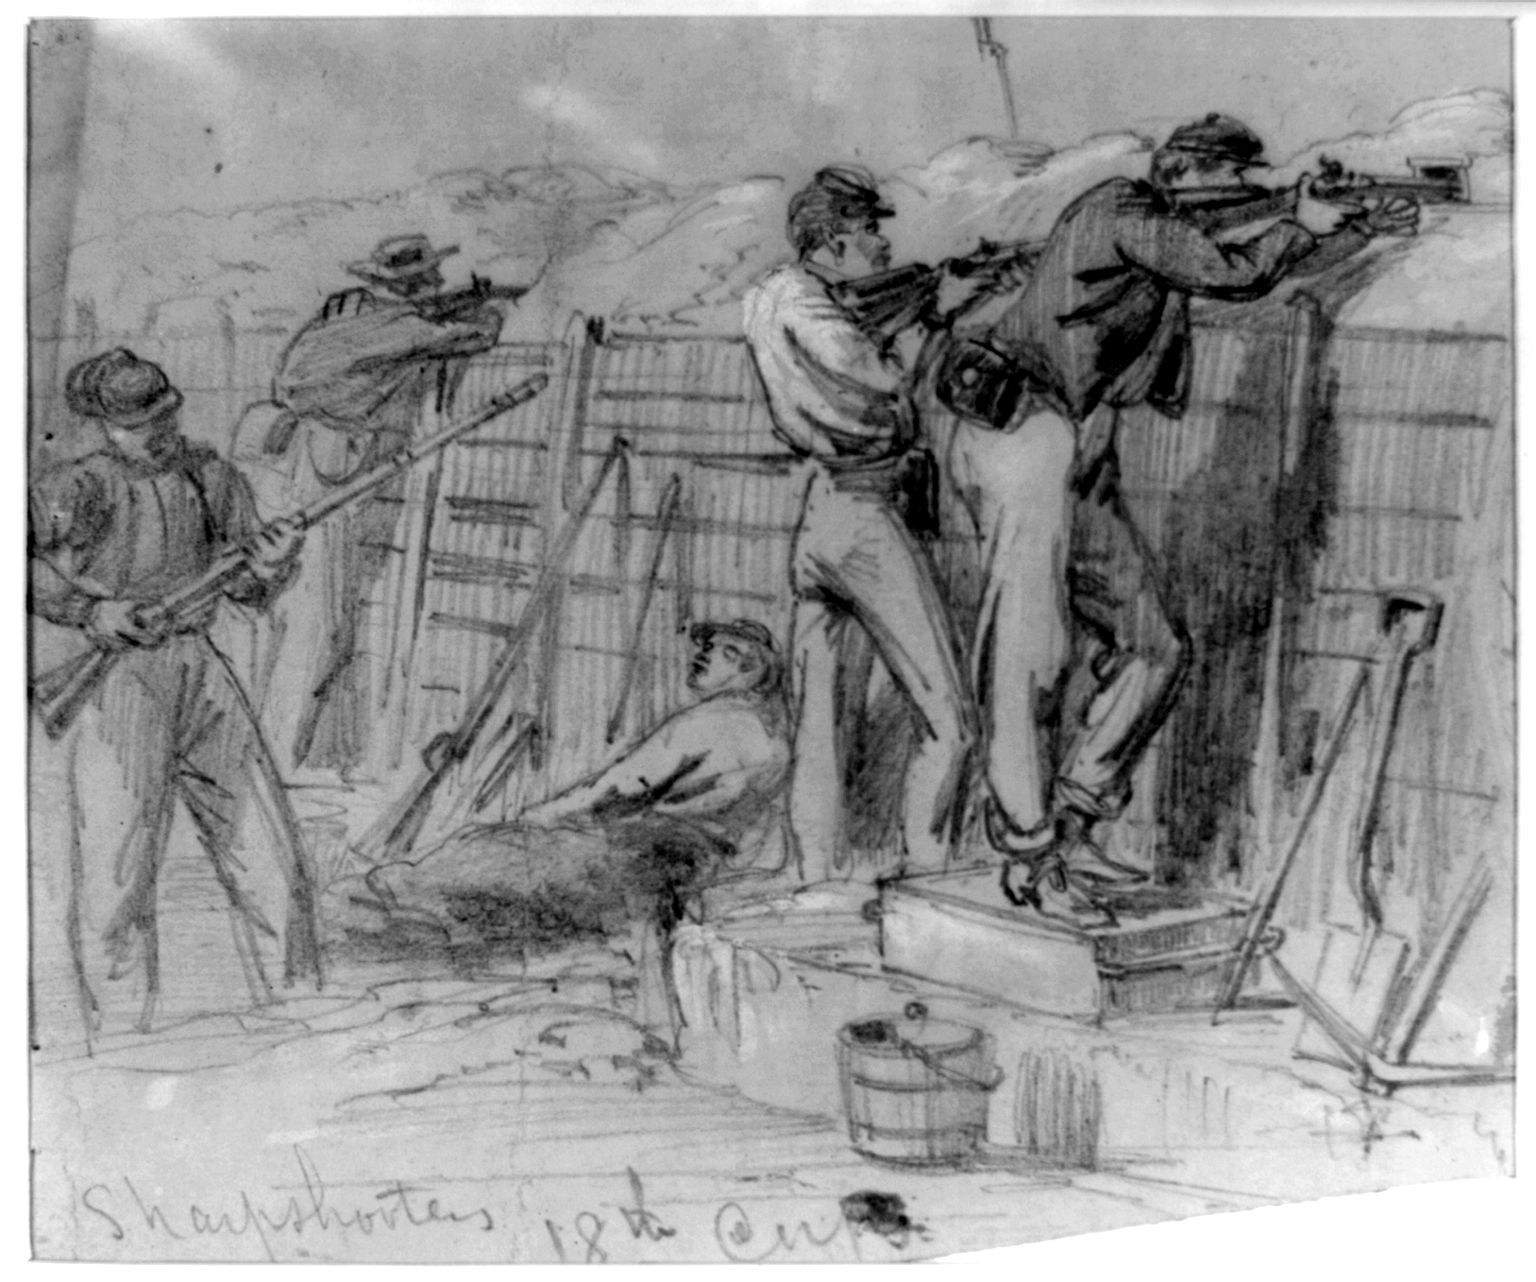 Sharpshooters from the Union’s XVIII Corps take aim in this illustration by Alfred R. Waud, originally published in Harper’s Weekly in August 1864.